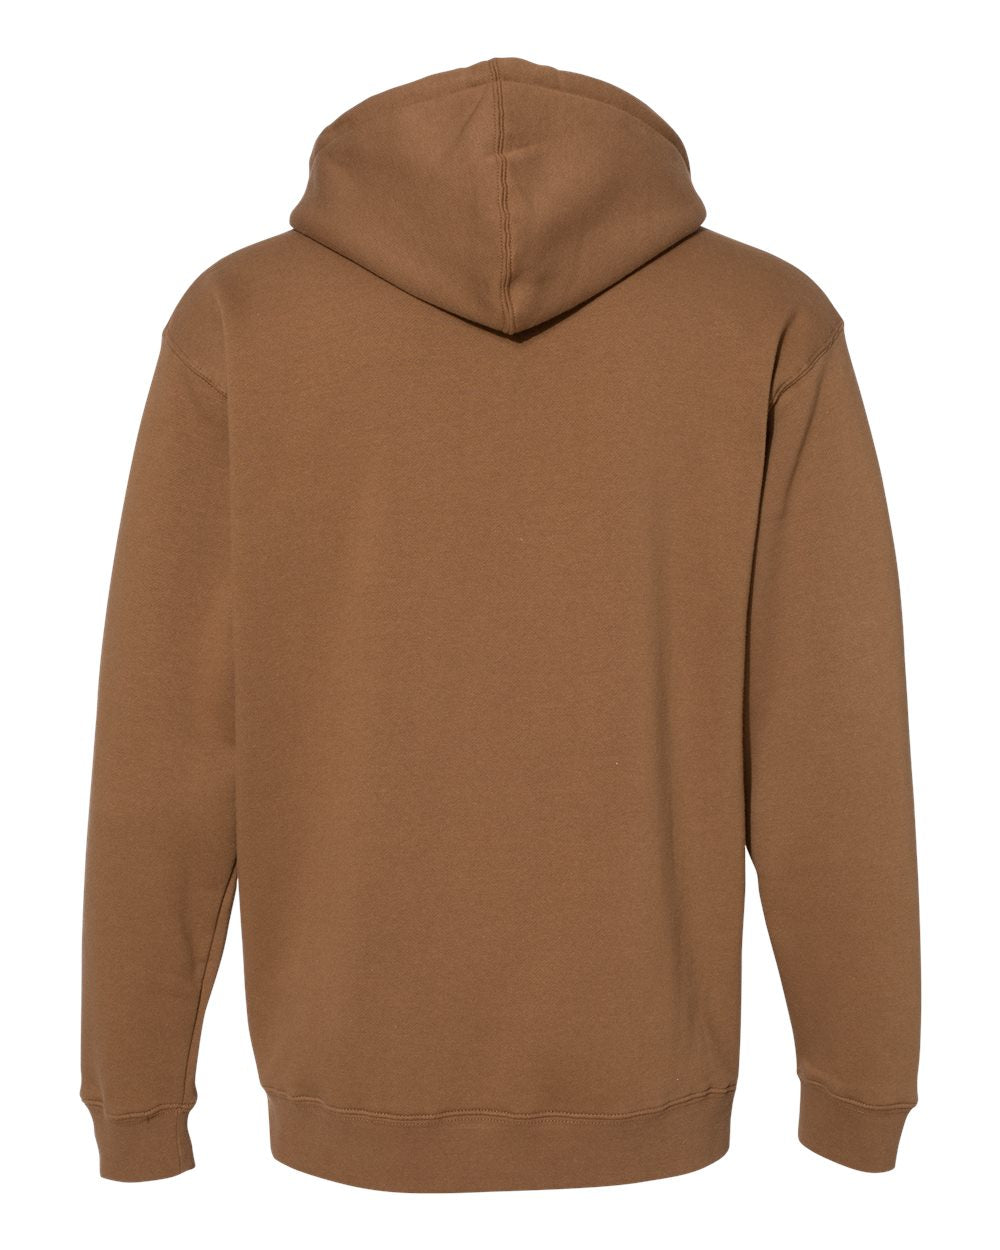 Independent Trading Co. Heavyweight Hooded Sweatshirt IND4000 #color_Saddle